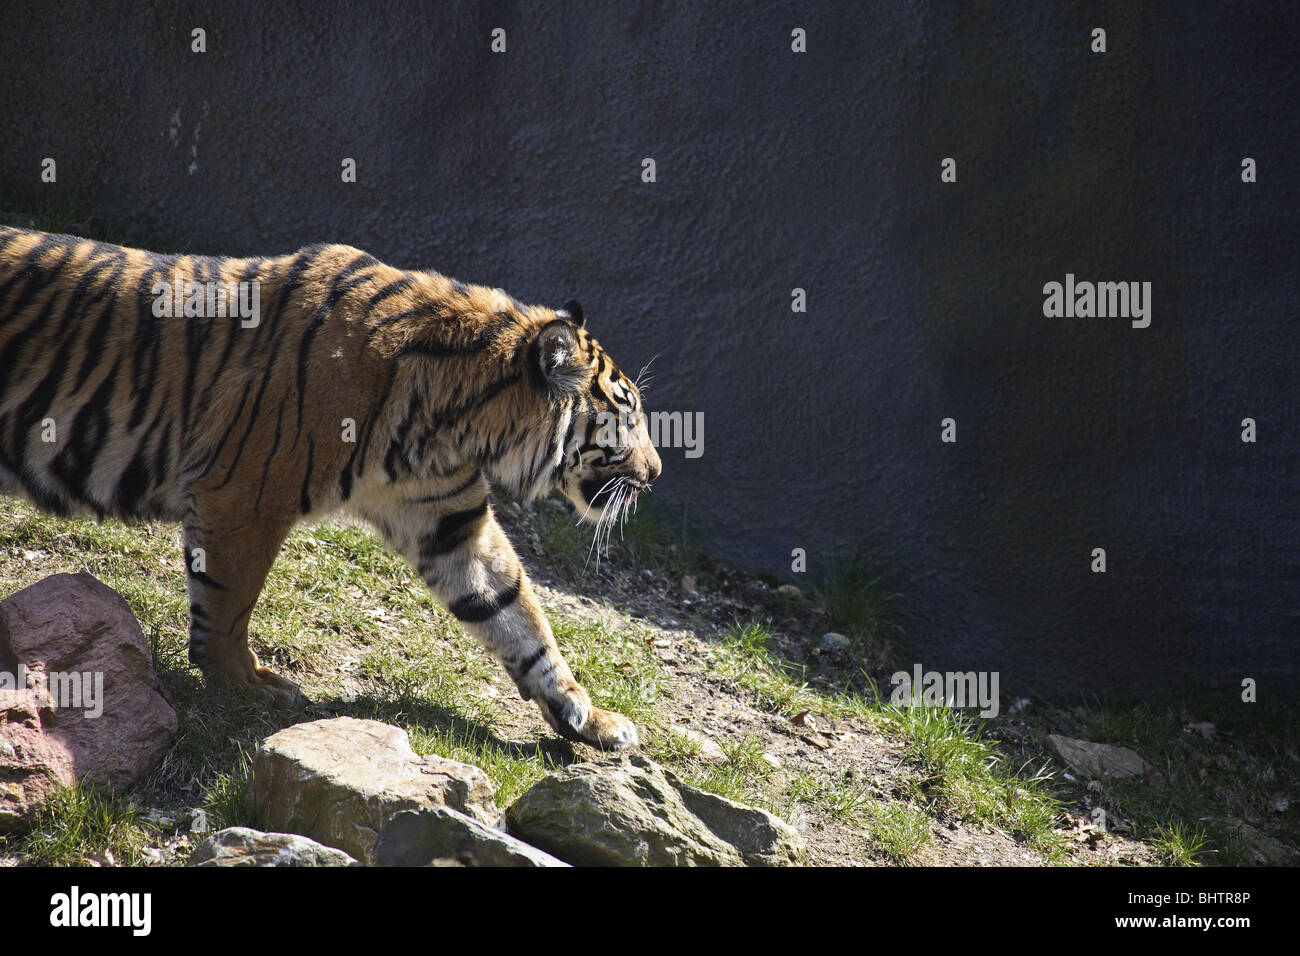 A tiger in a zoo, walking Stock Photo